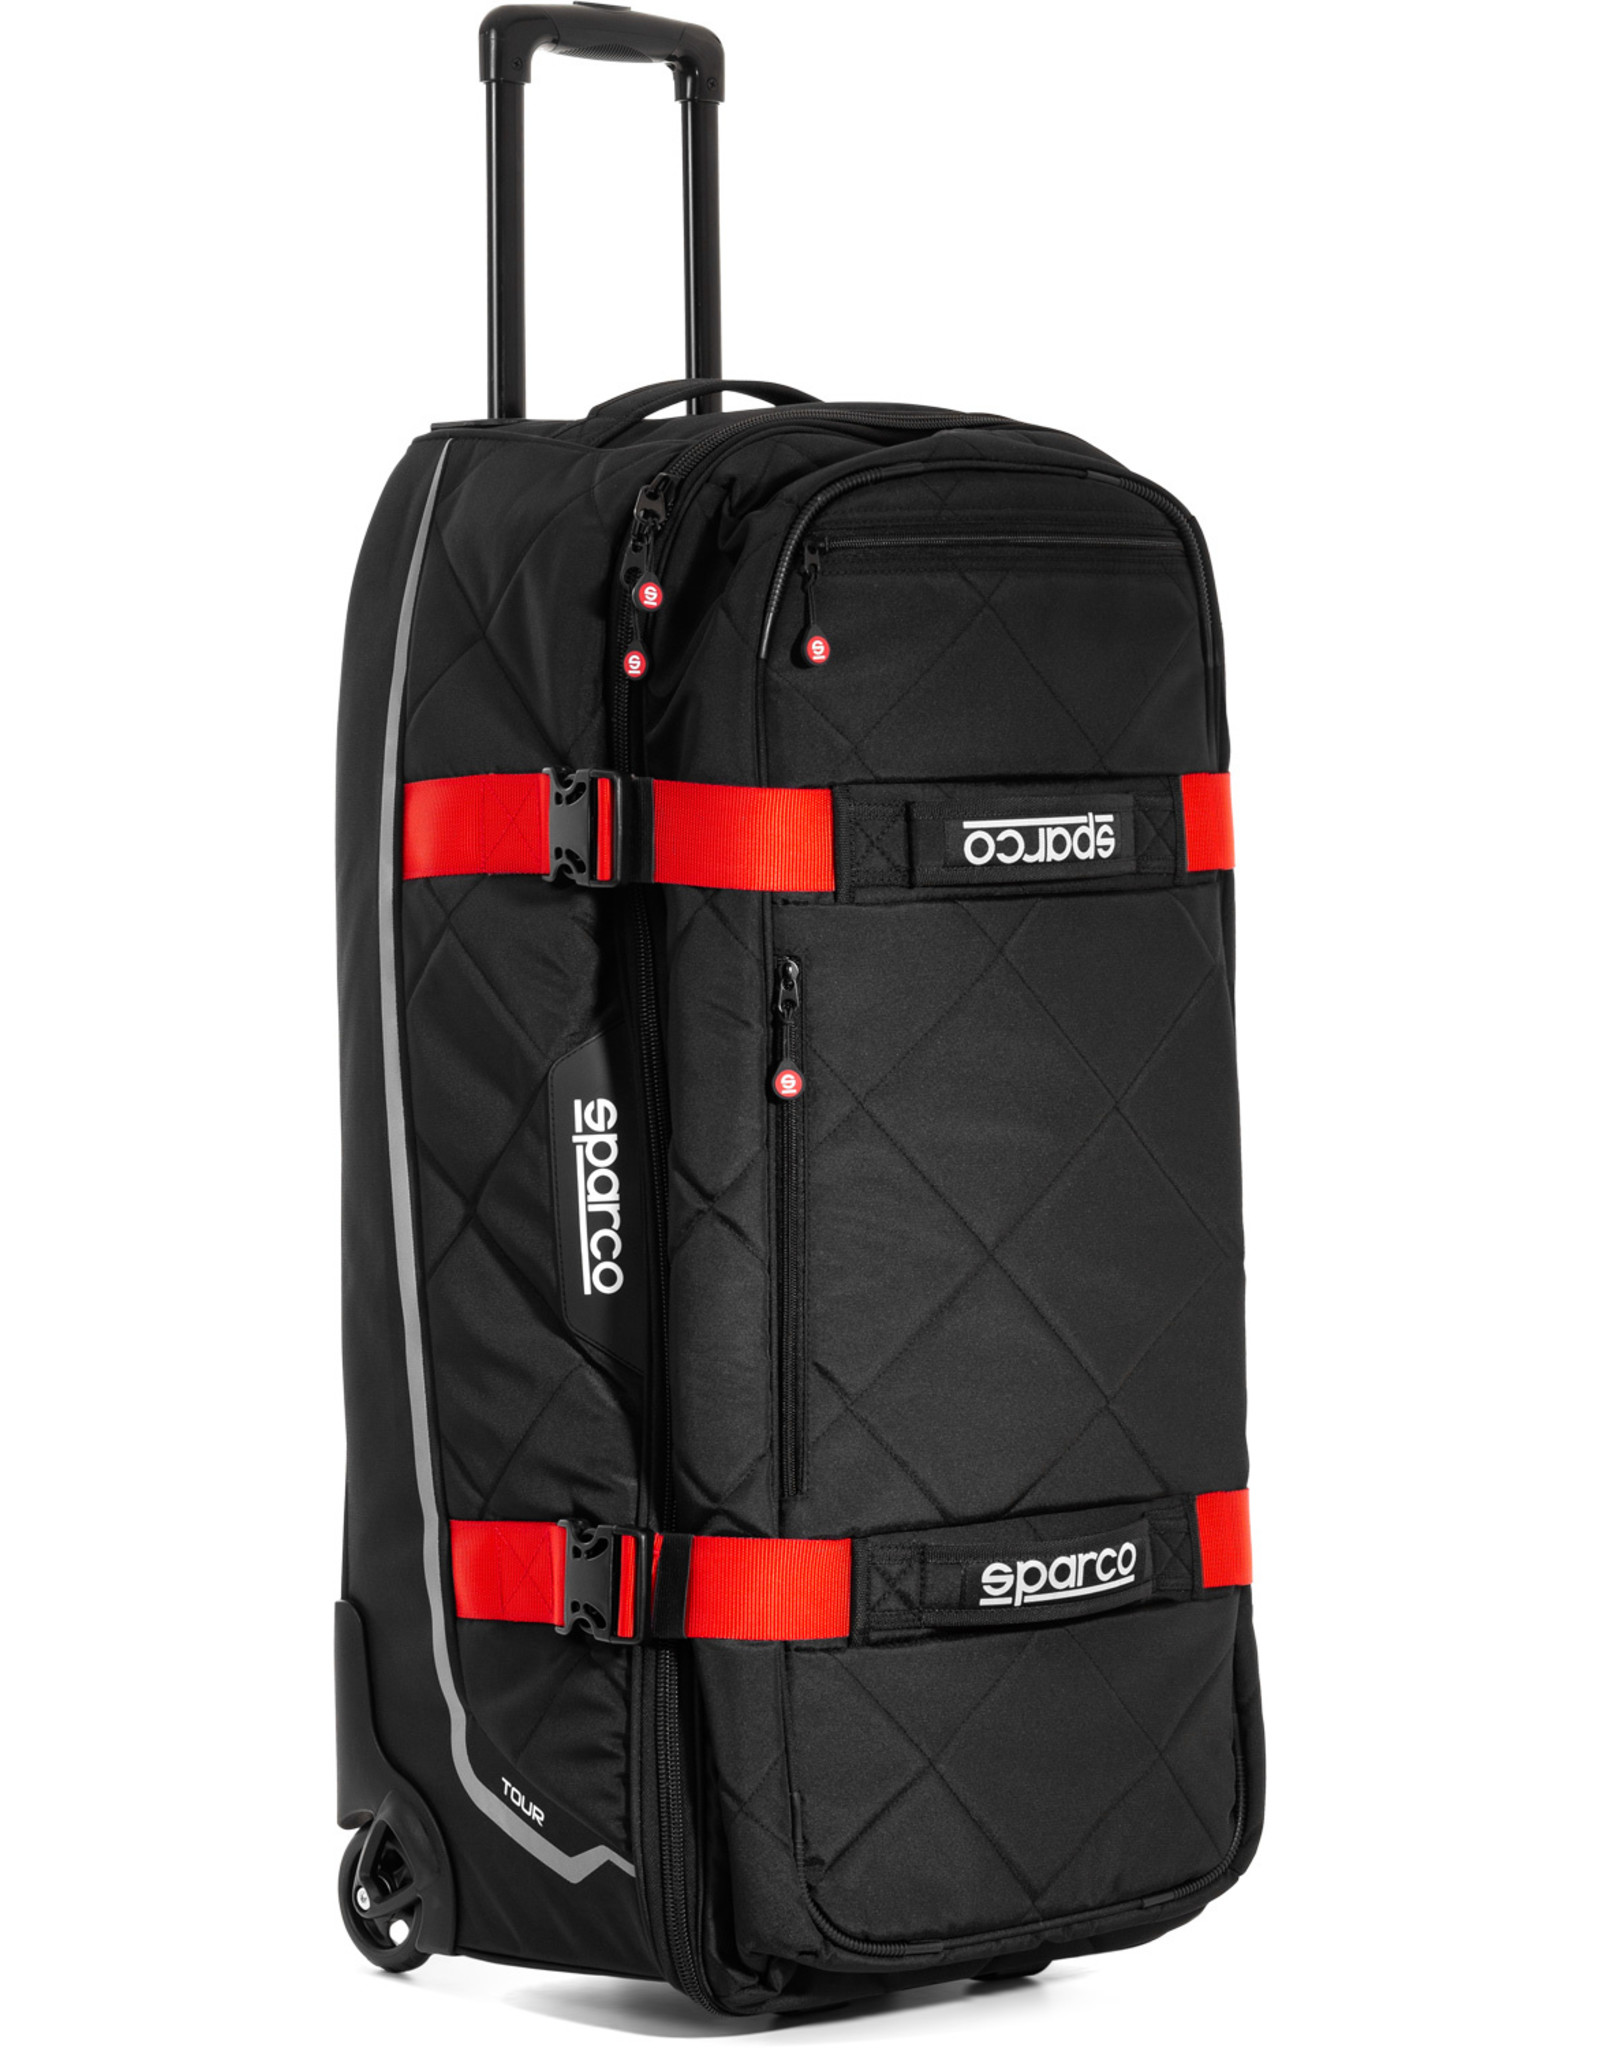 Sparco Sparco Travelbag Big black / red